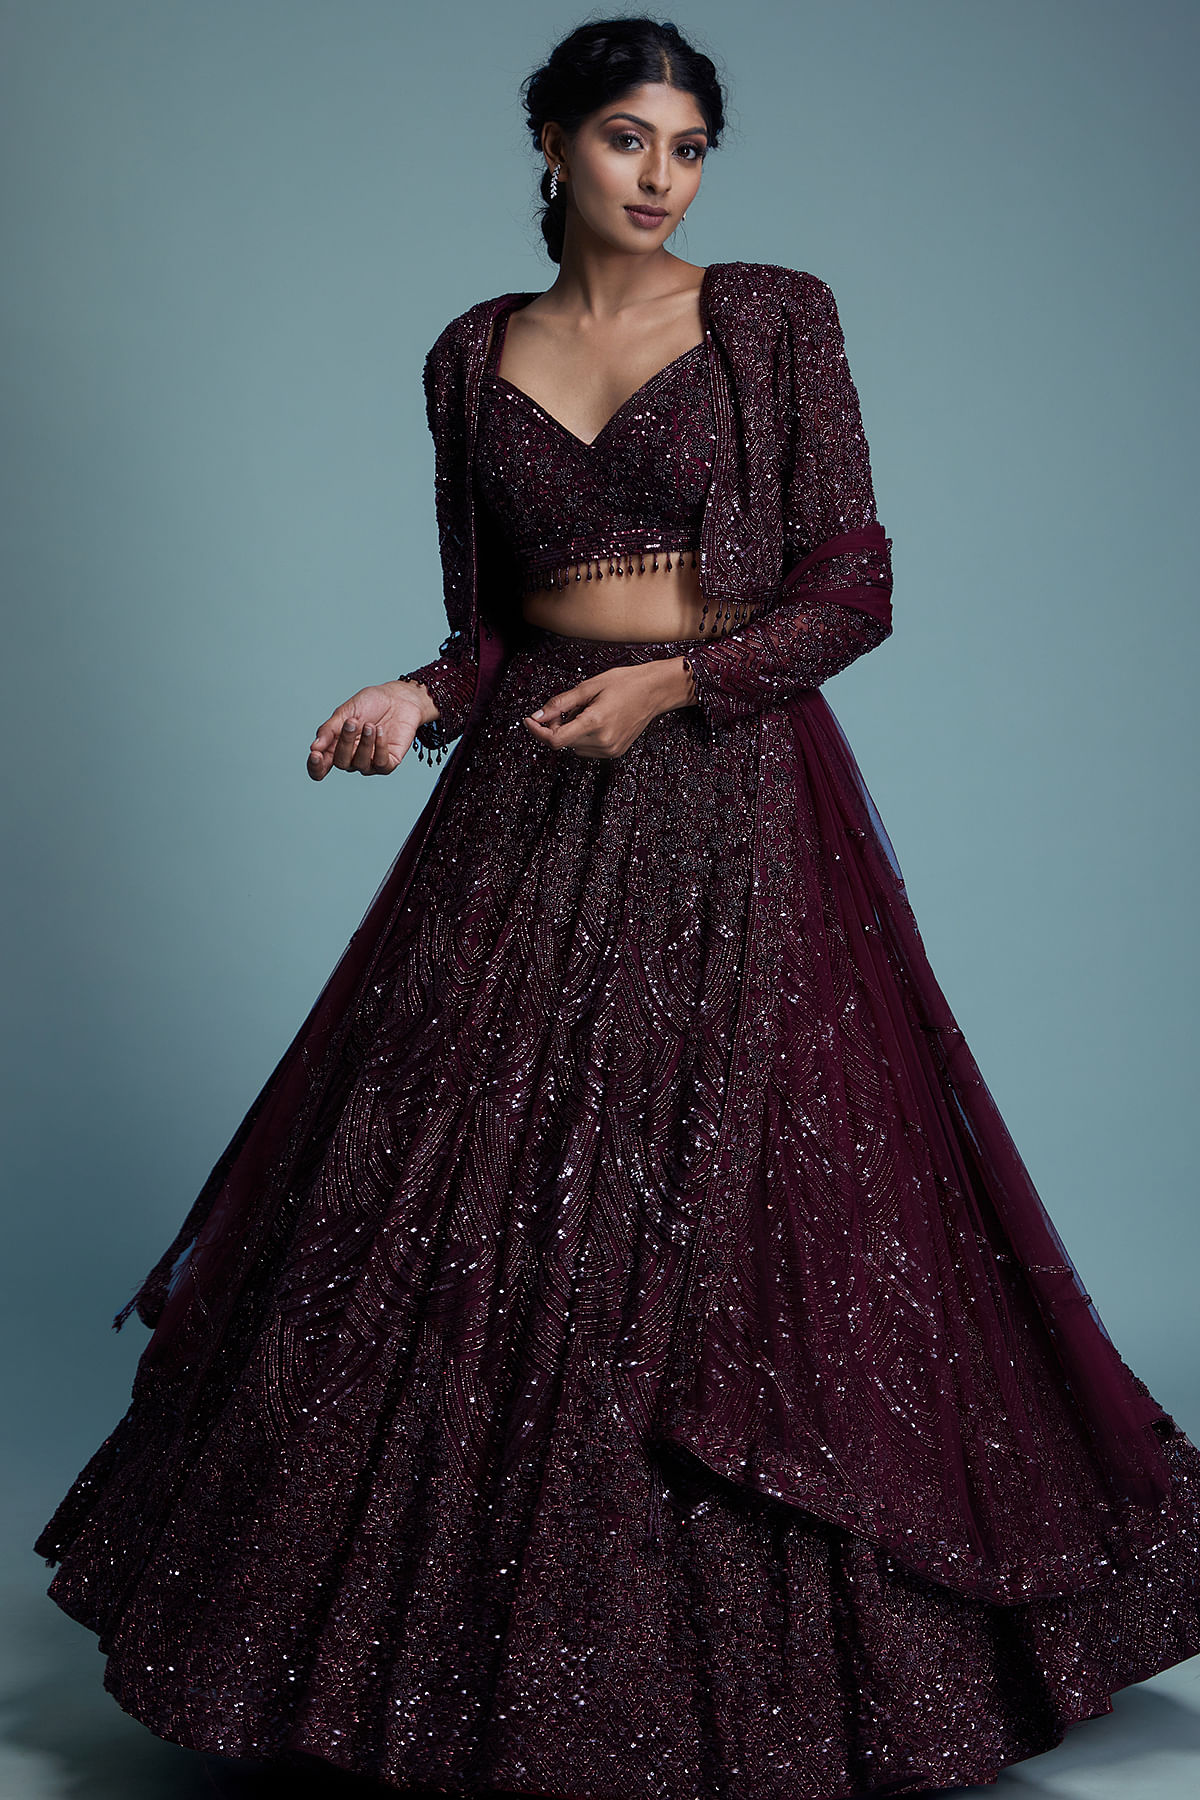 Top 10 Bridal Outfit Ideas for Sangeet to Get That Glam Look - SetMyWed